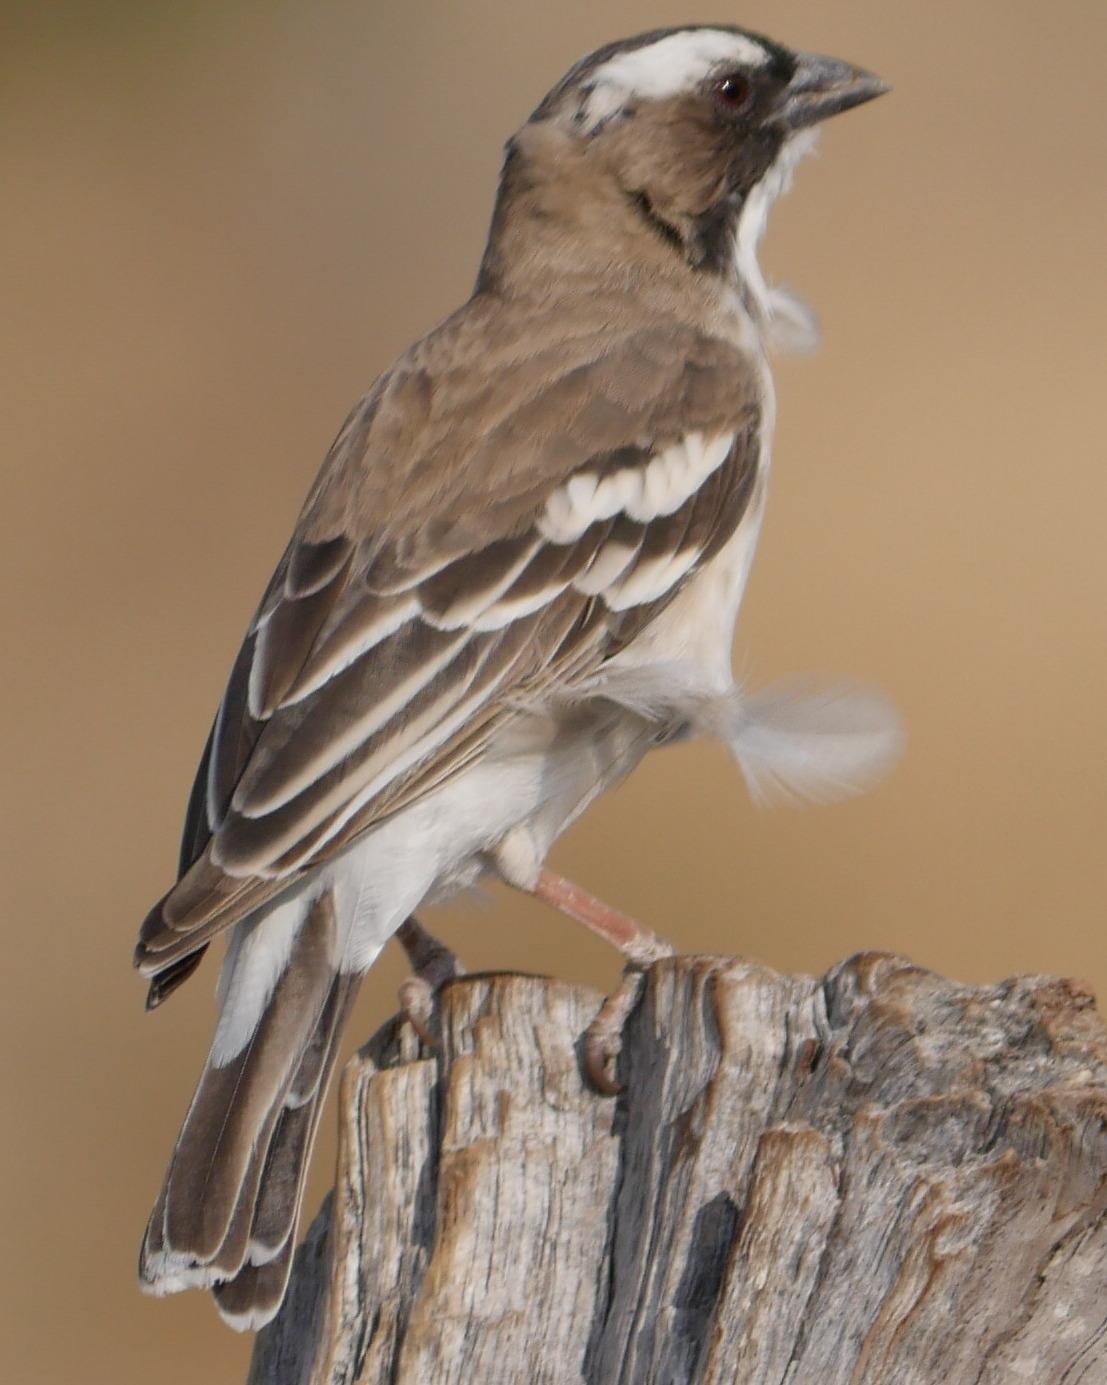 White-browed Sparrow-Weaver Photo by Peter Lowe